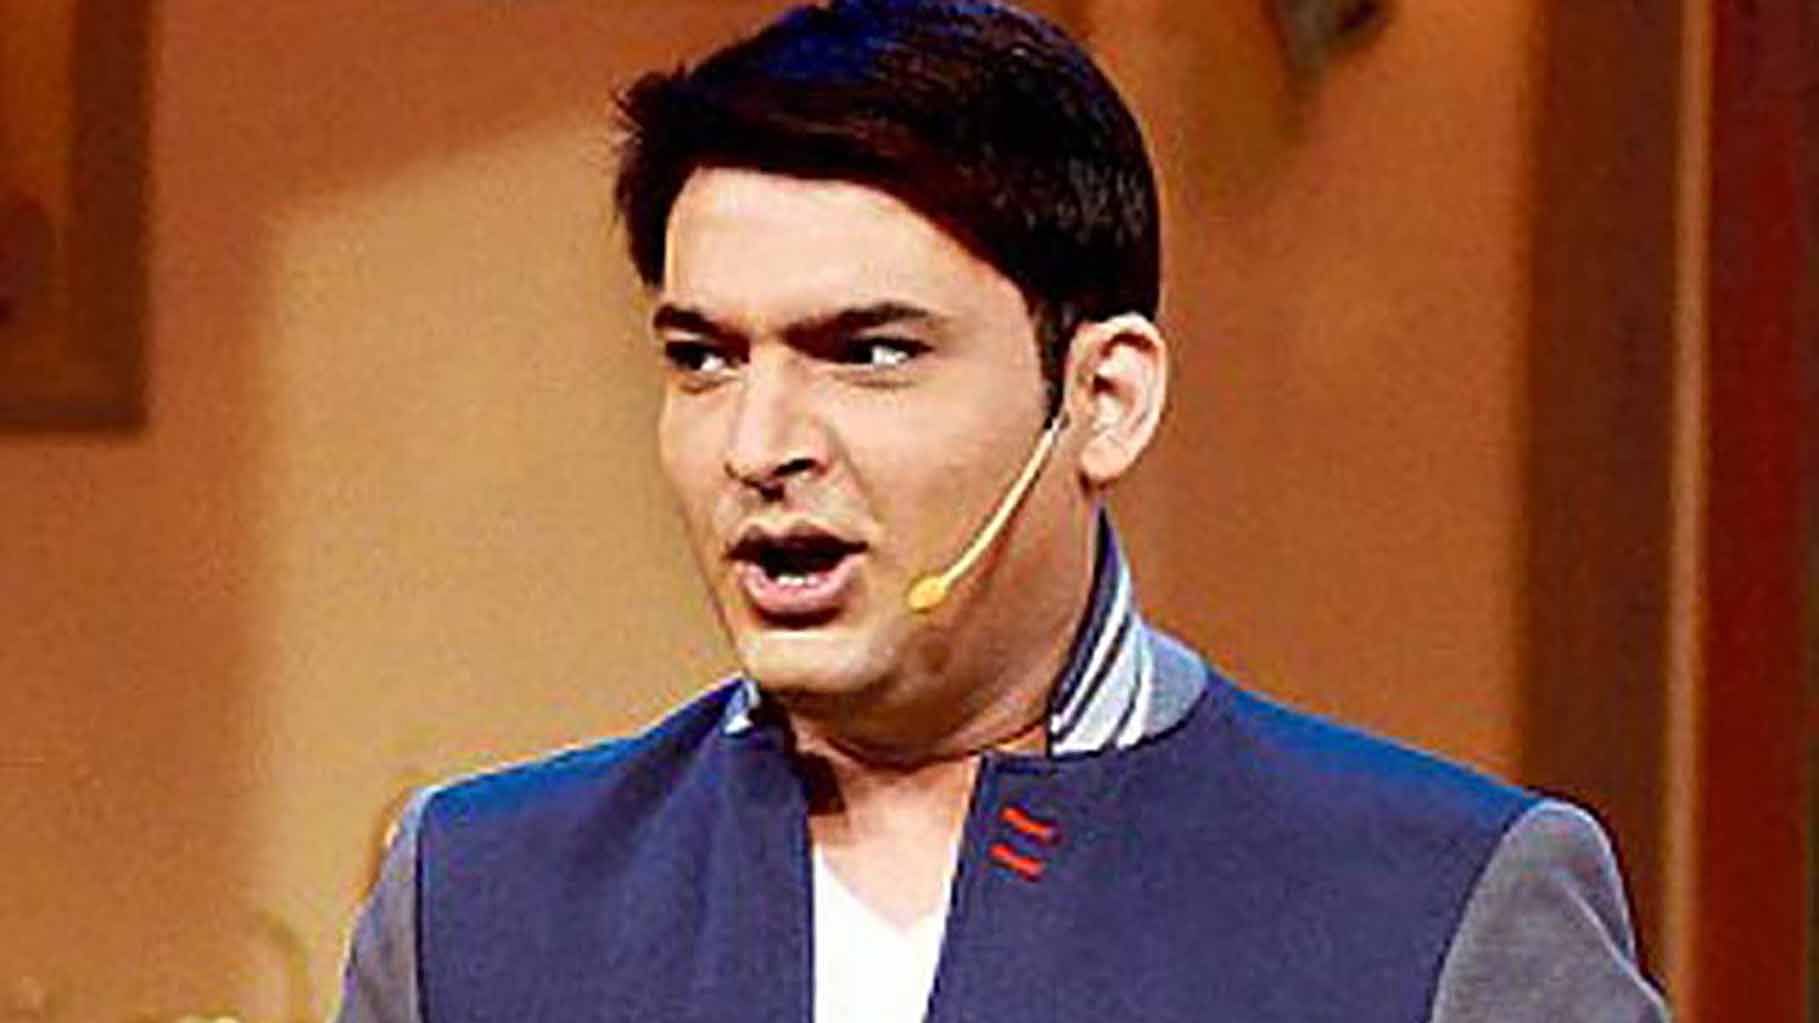 A scene of Comedy Nights with Kapil which made Kapil Sharma famous. (Photo: YouTube)